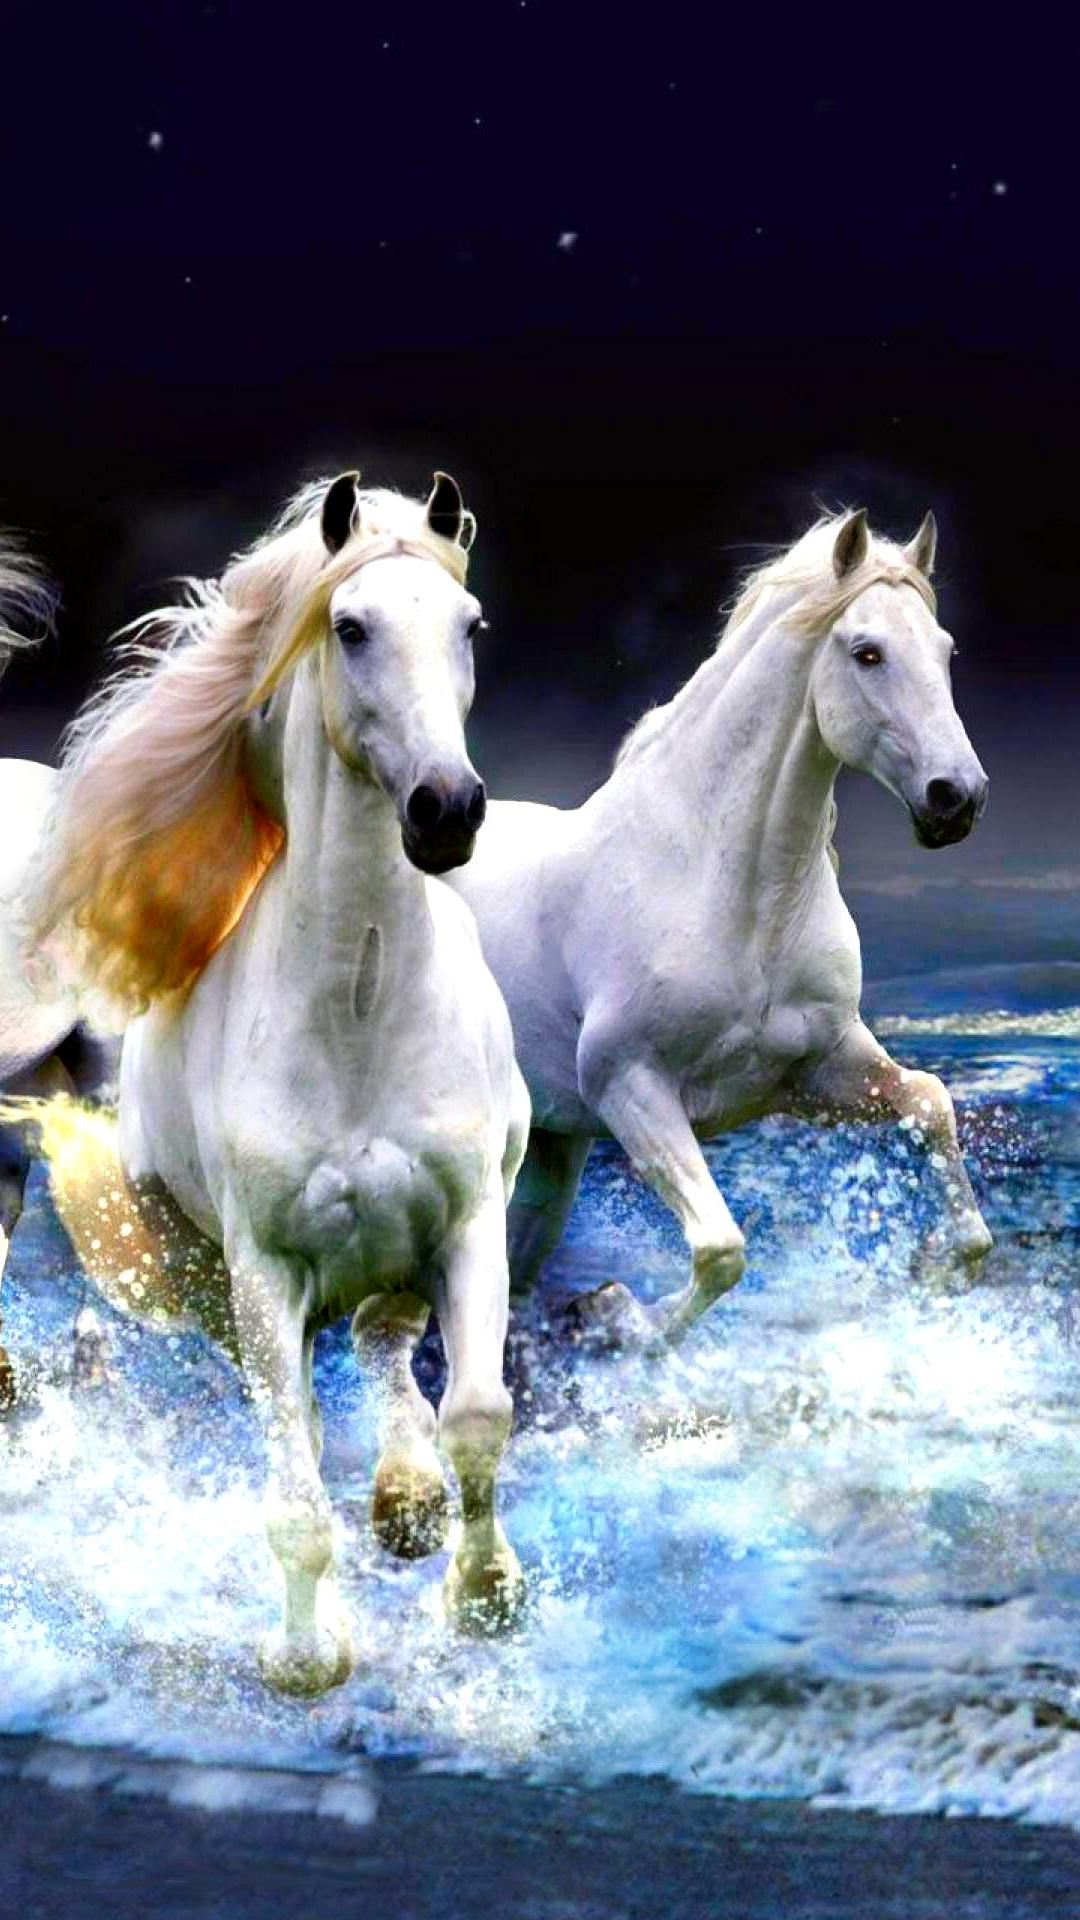 Seven Horse Mobile Wallpapers - Wallpaper Cave